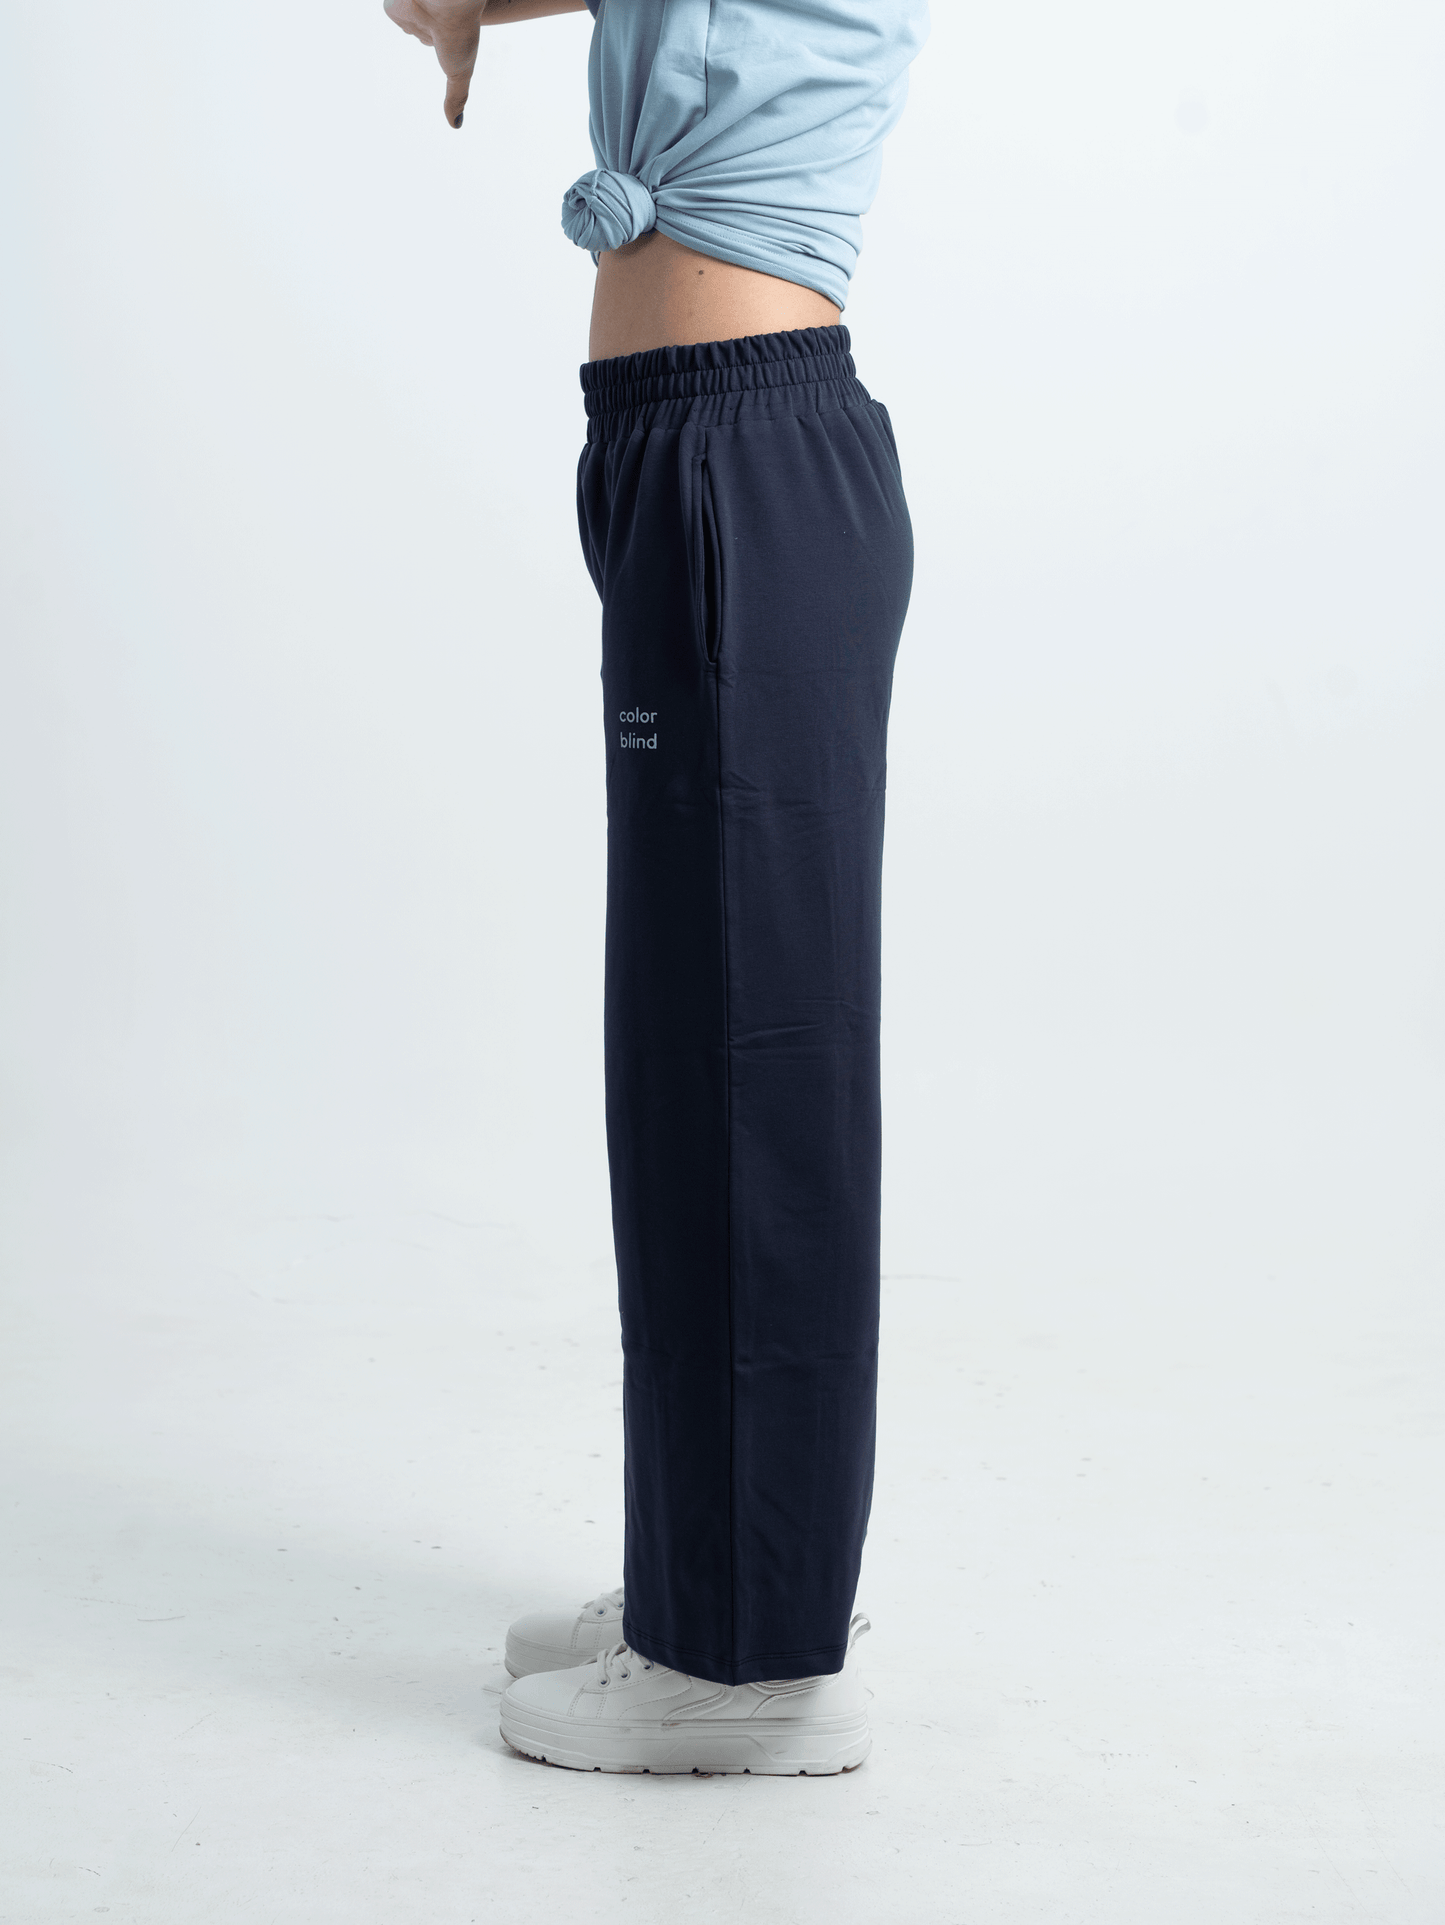 MIDNIGHT BLUE WOMEN'S RELAXED FIT PANTS